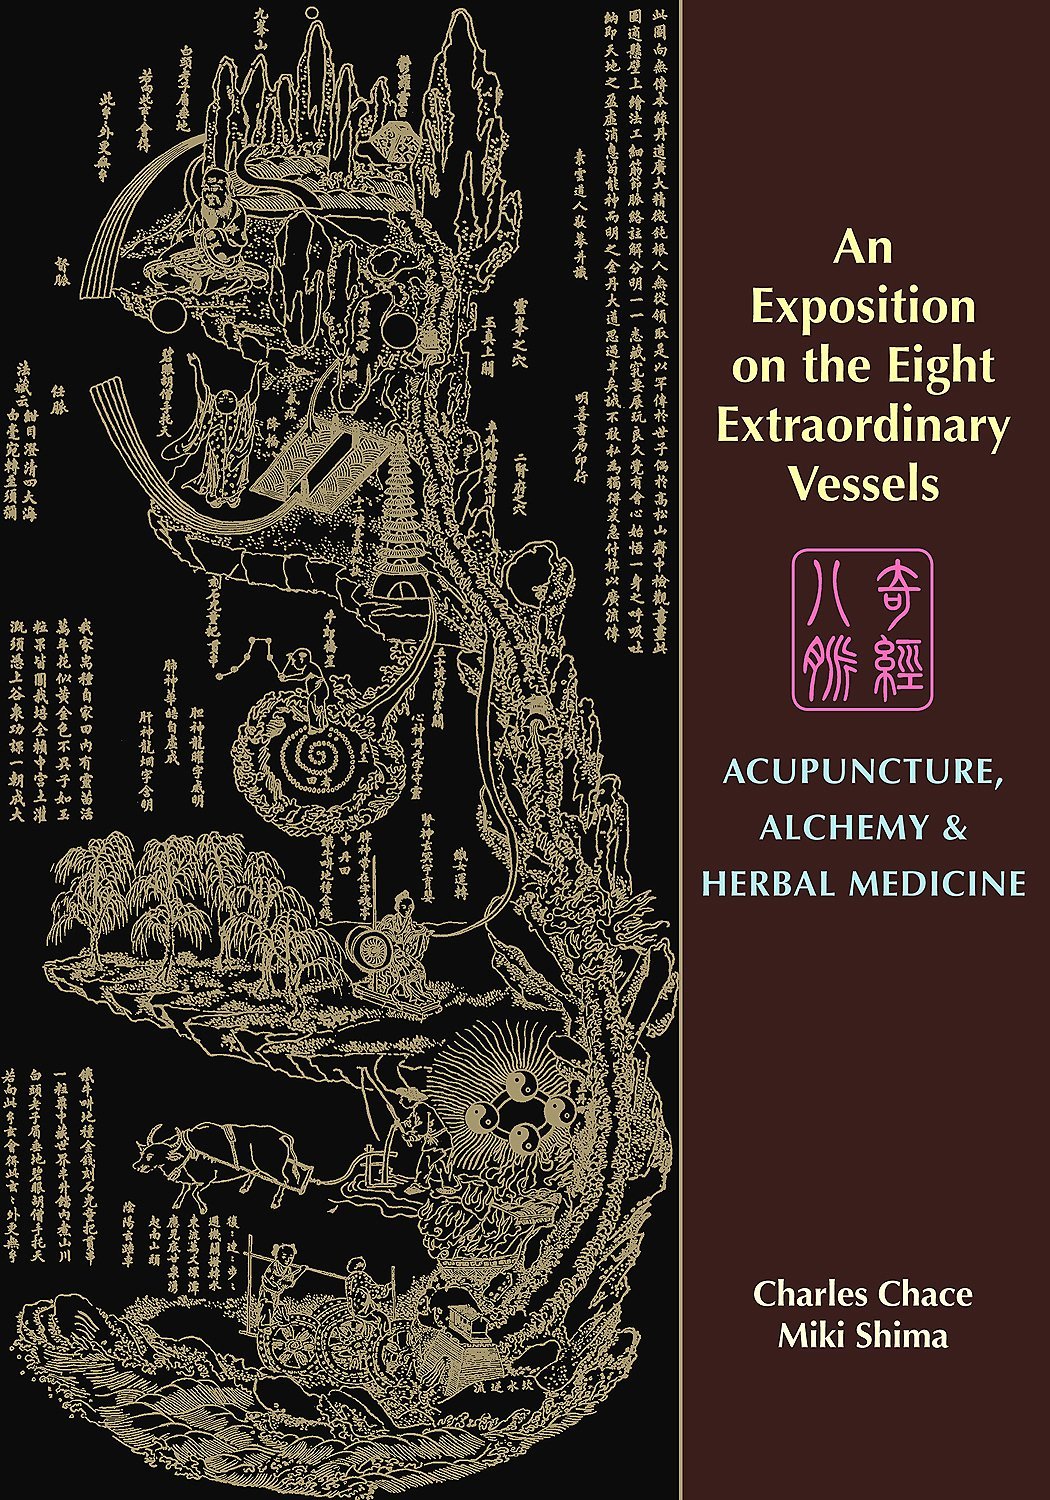 An Exposition on the Eight Extraordinary Vessels: Acupuncture, Alchemy, and Herbal Medicine by Charles Chace and Miki Shima